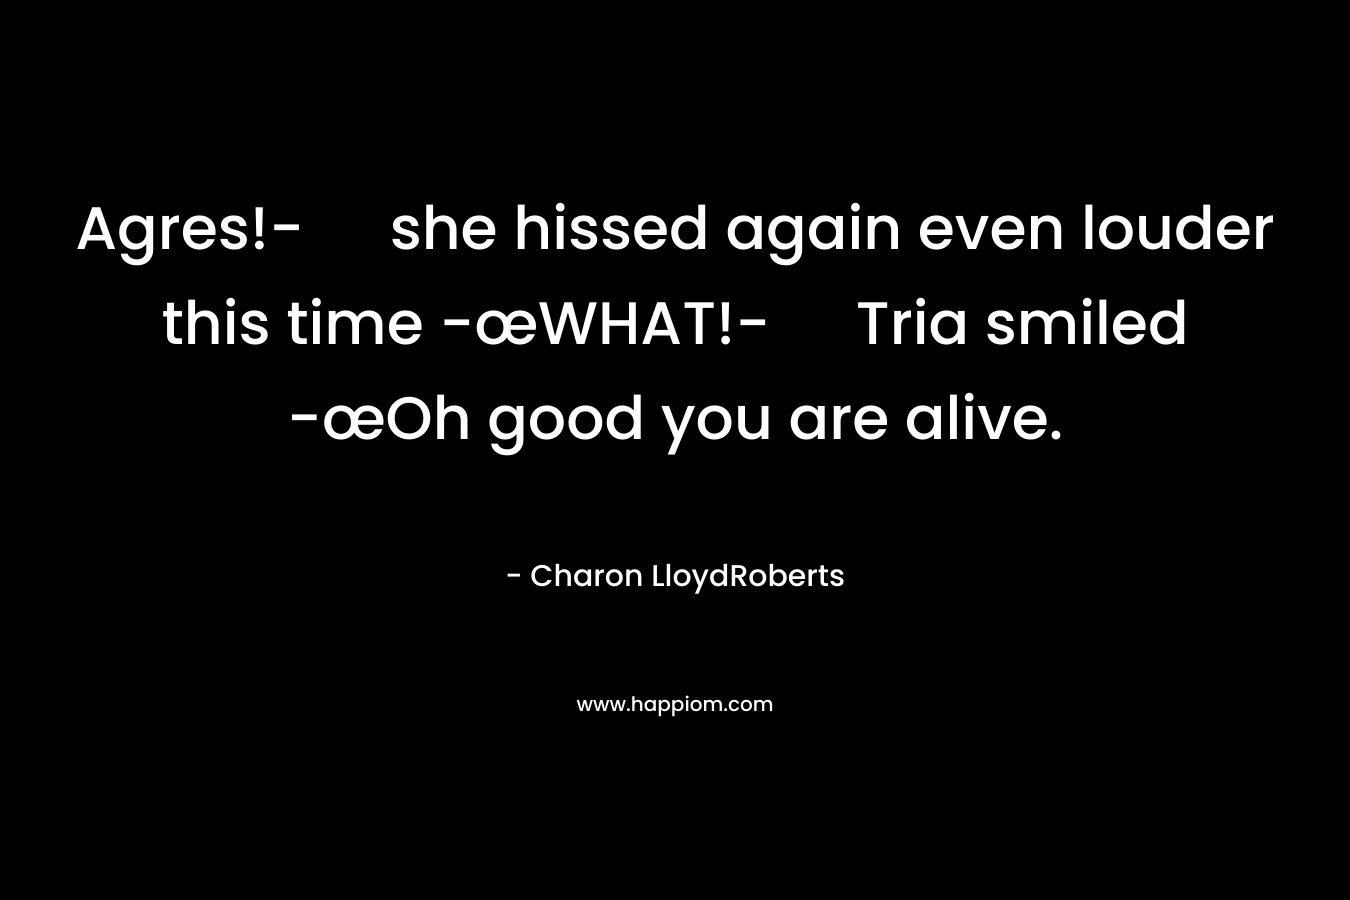 Agres!- she hissed again even louder this time -œWHAT!- Tria smiled -œOh good you are alive.